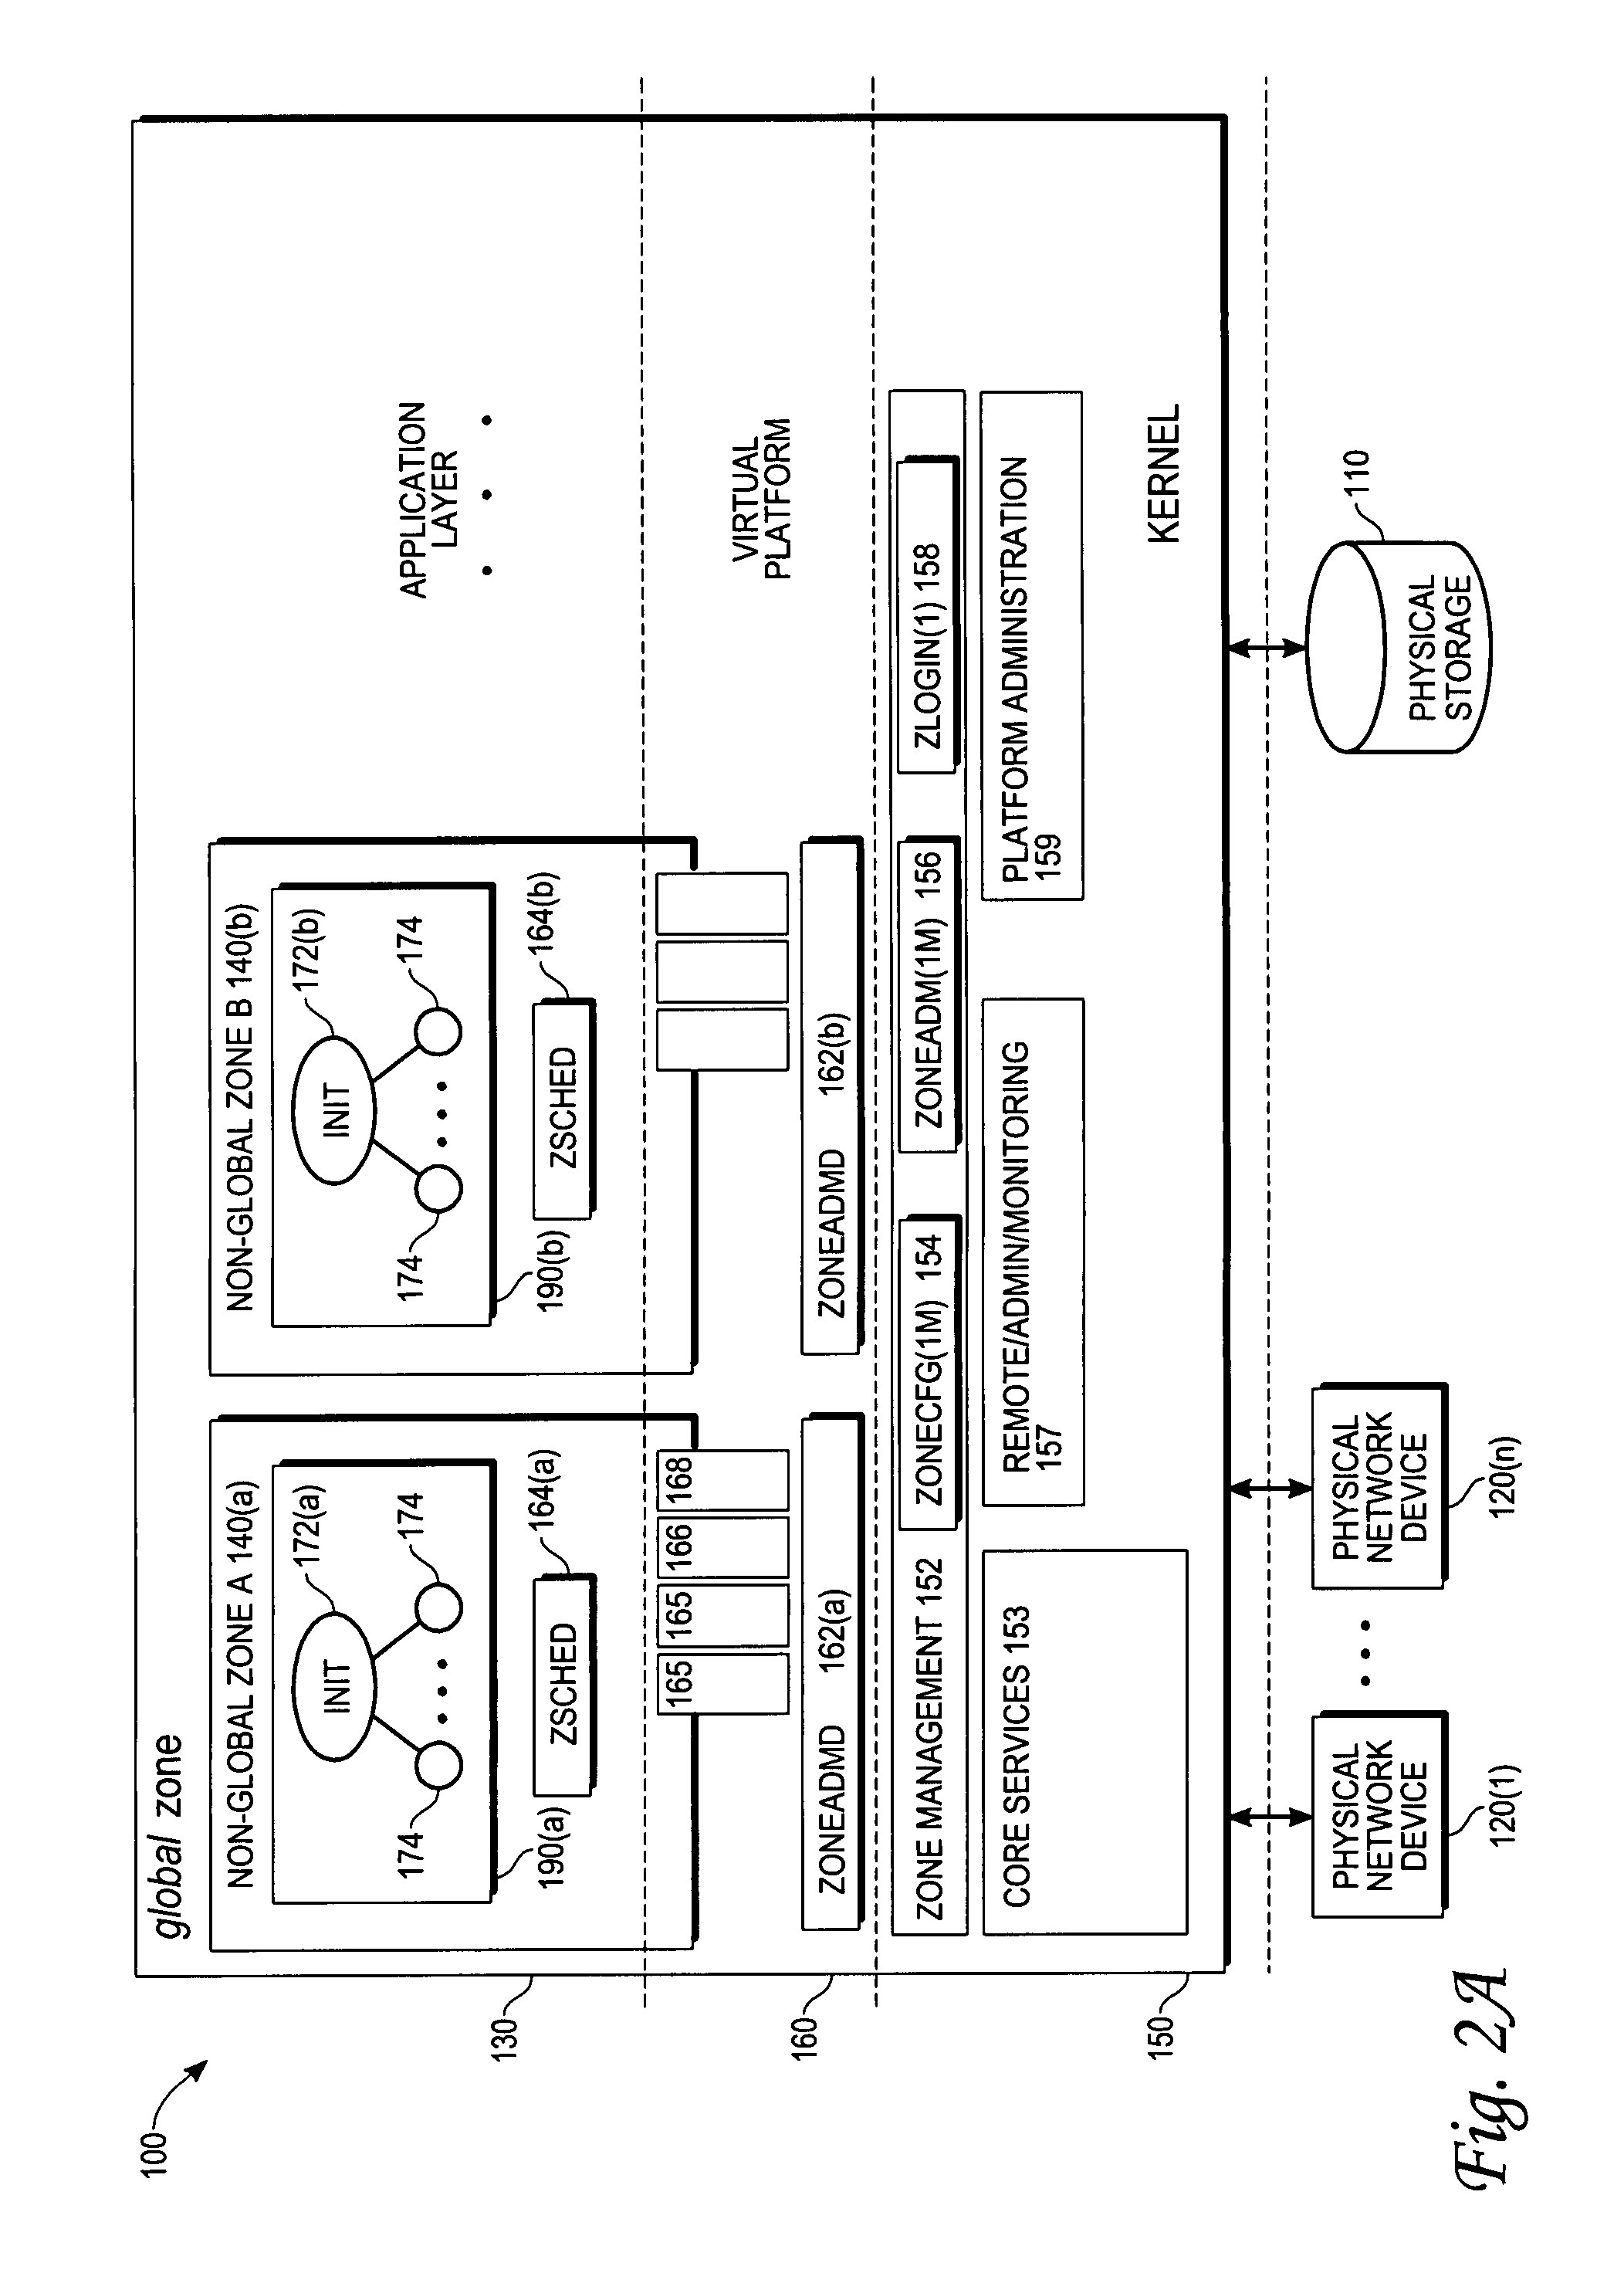 Two-level service model in operating system partitions